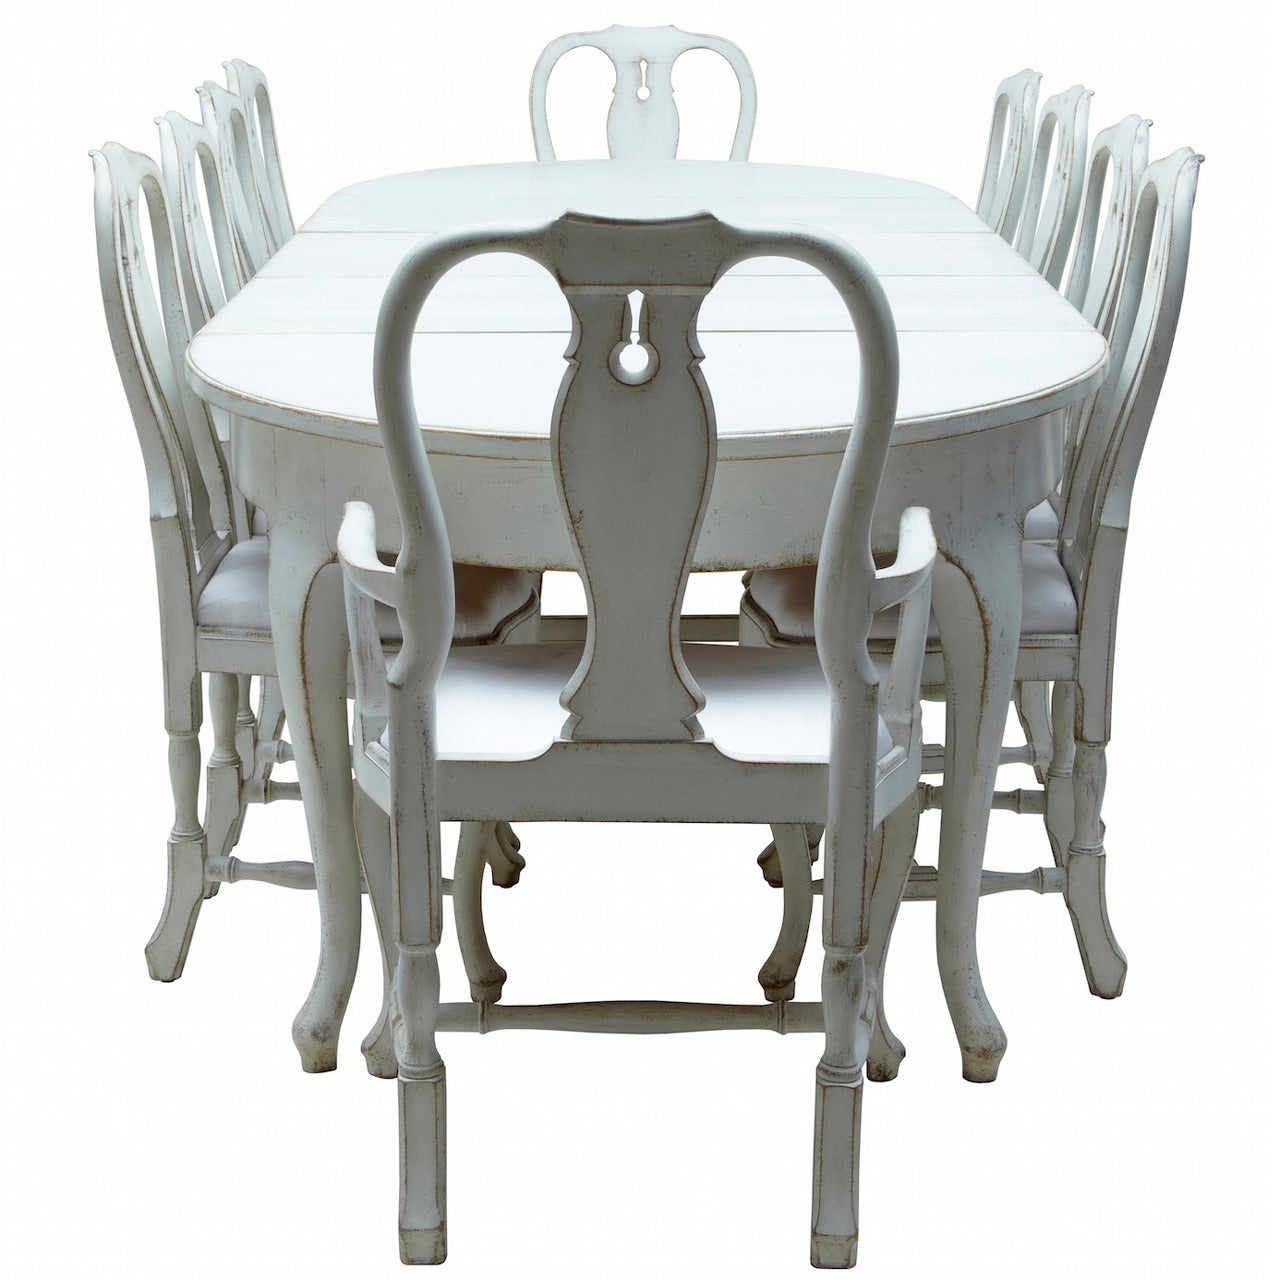 20th Century Swedish Painted Dining Room Table with Ten Chairs